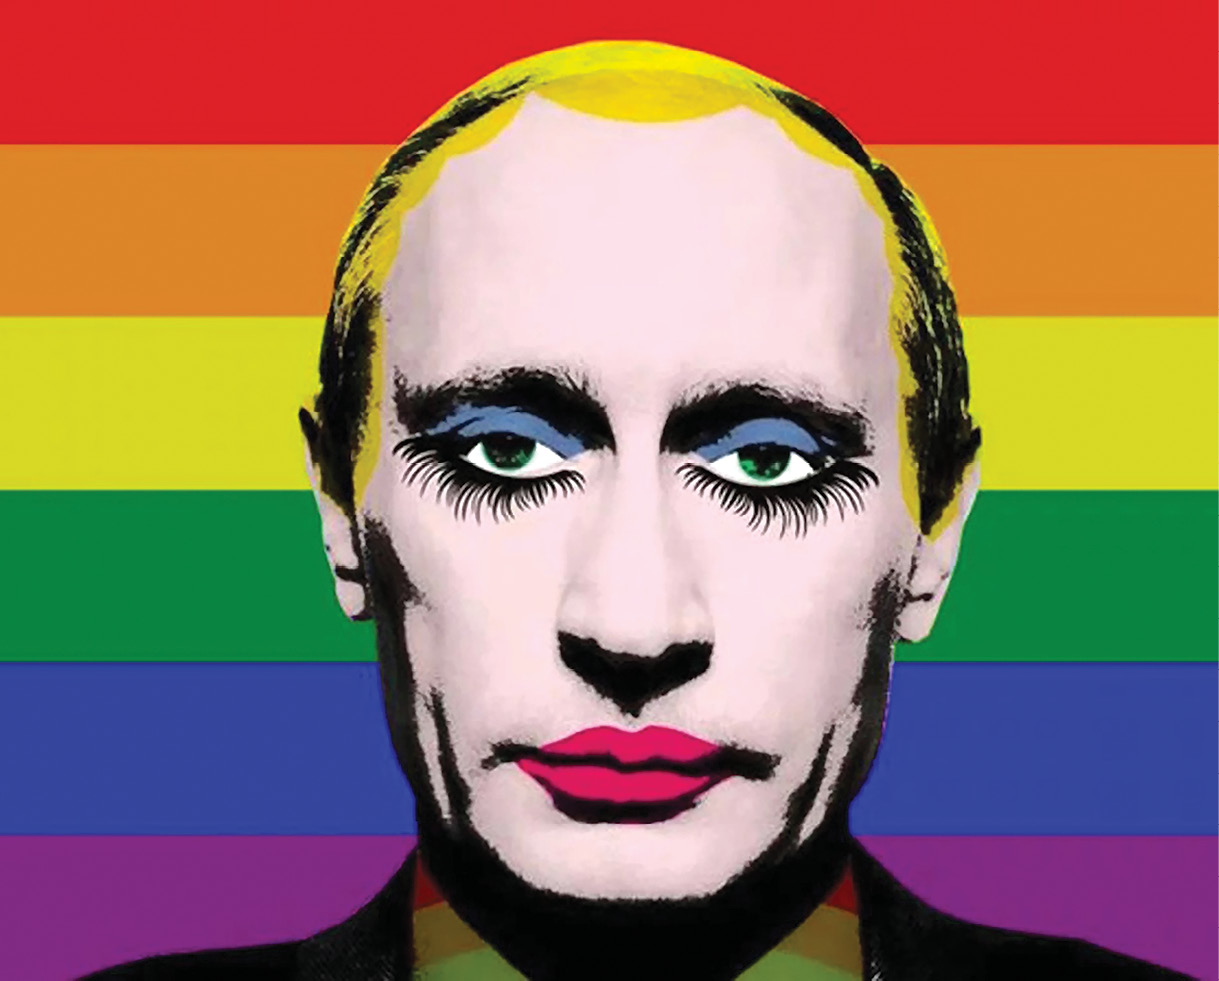 Vladimir Putin officially banned this popular meme of himself with his face painted in drag. That reaction inadvertently made the meme more popular than ever, and it became an international sensation. According to the author of this article, Putin’s “thin skin” makes him an easy target for ridicule.  (Artist unknown)